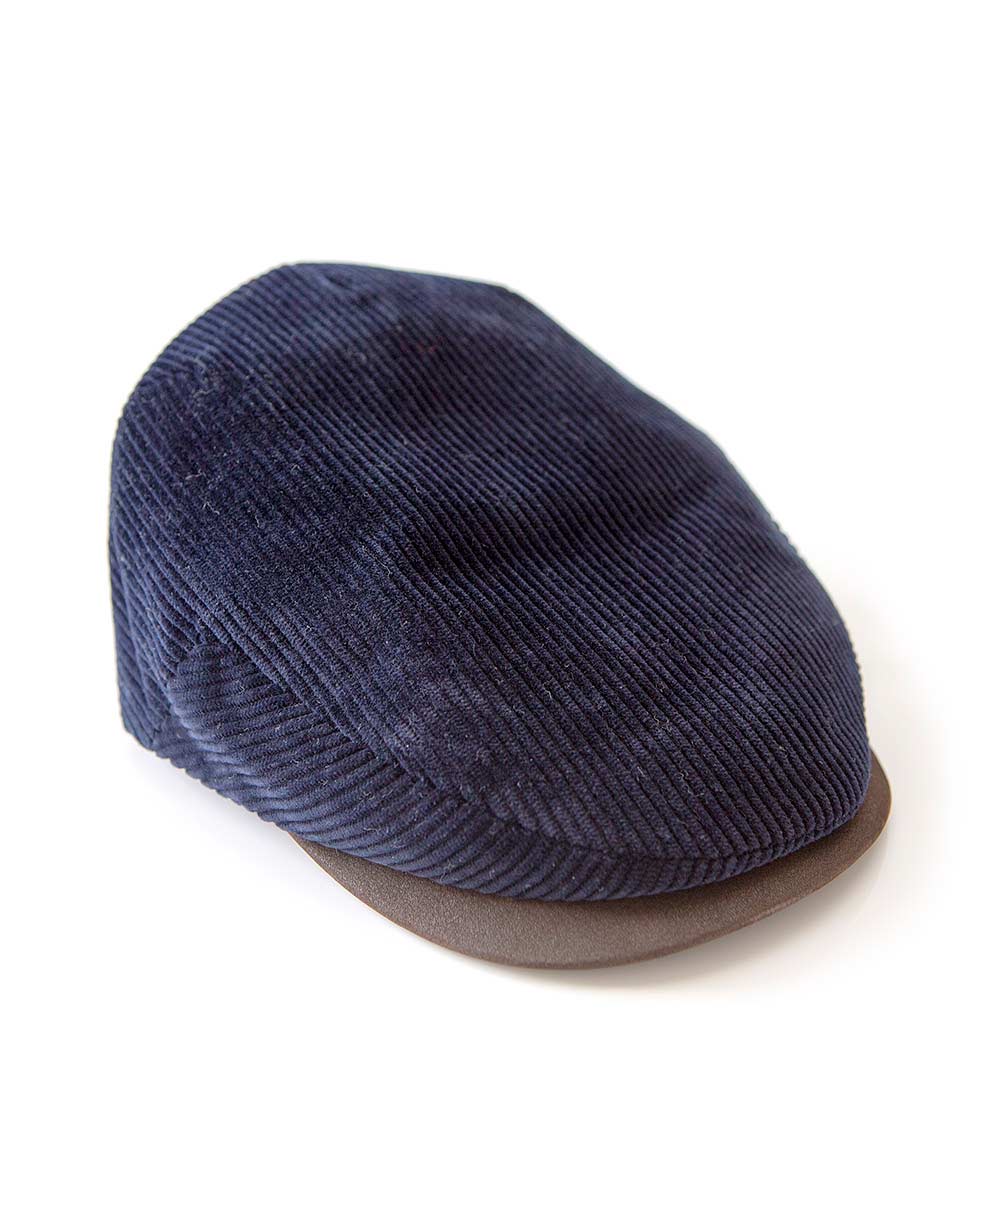 Corduroy Flat Cap with Leather Strap Navy